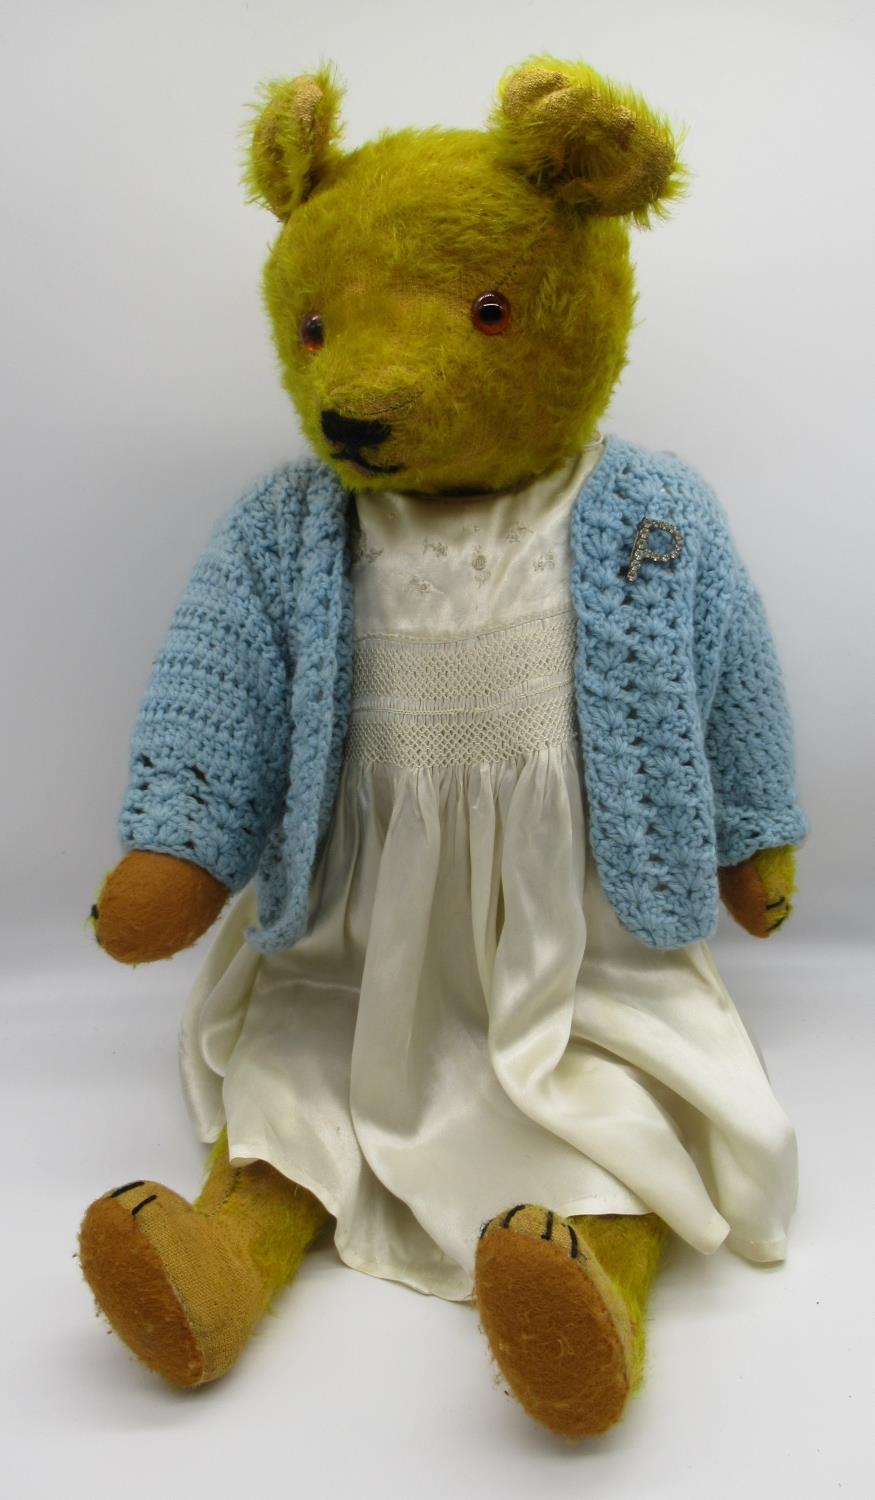 Early C20th American teddy bear in golden mohair with glass eyes jointed arms and legs, stitched - Image 3 of 3